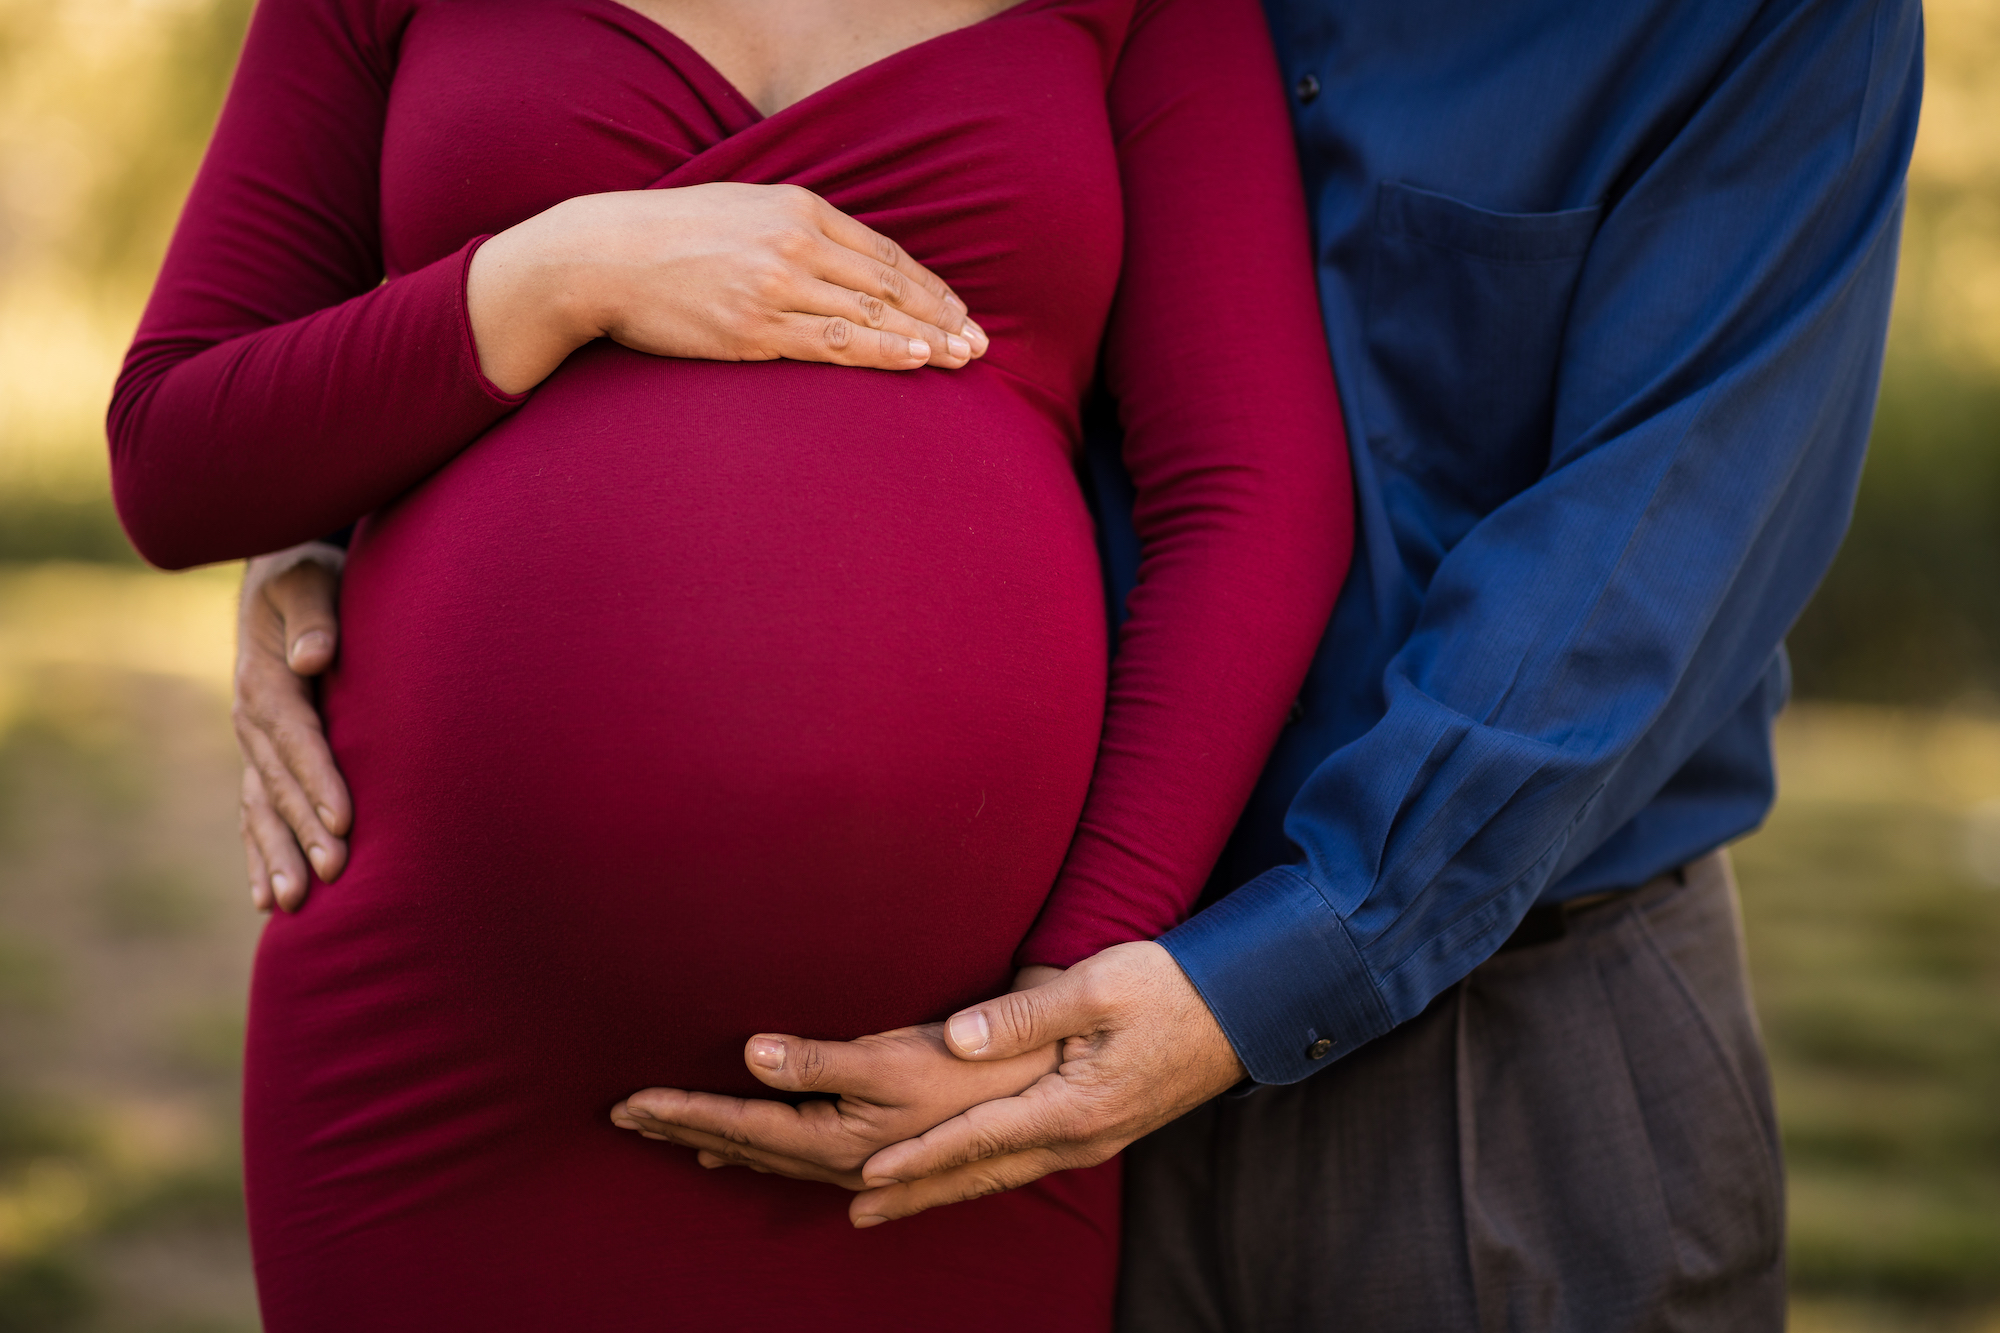 Maternity Photography Pricing Advice to Maximize Revenue